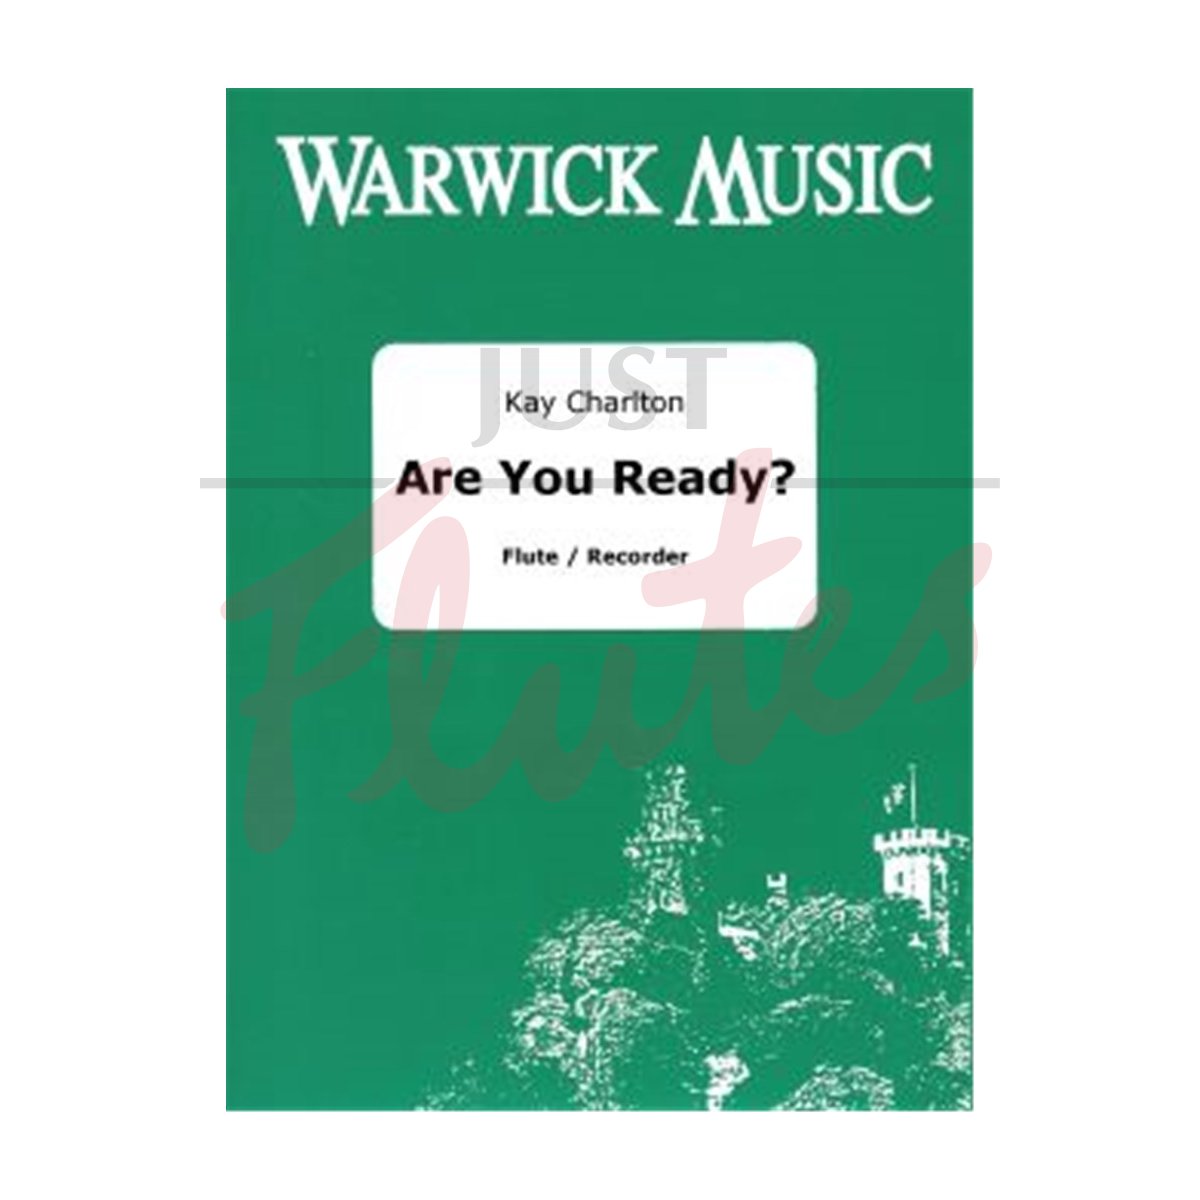 Are You Ready? for Flute/Recorder